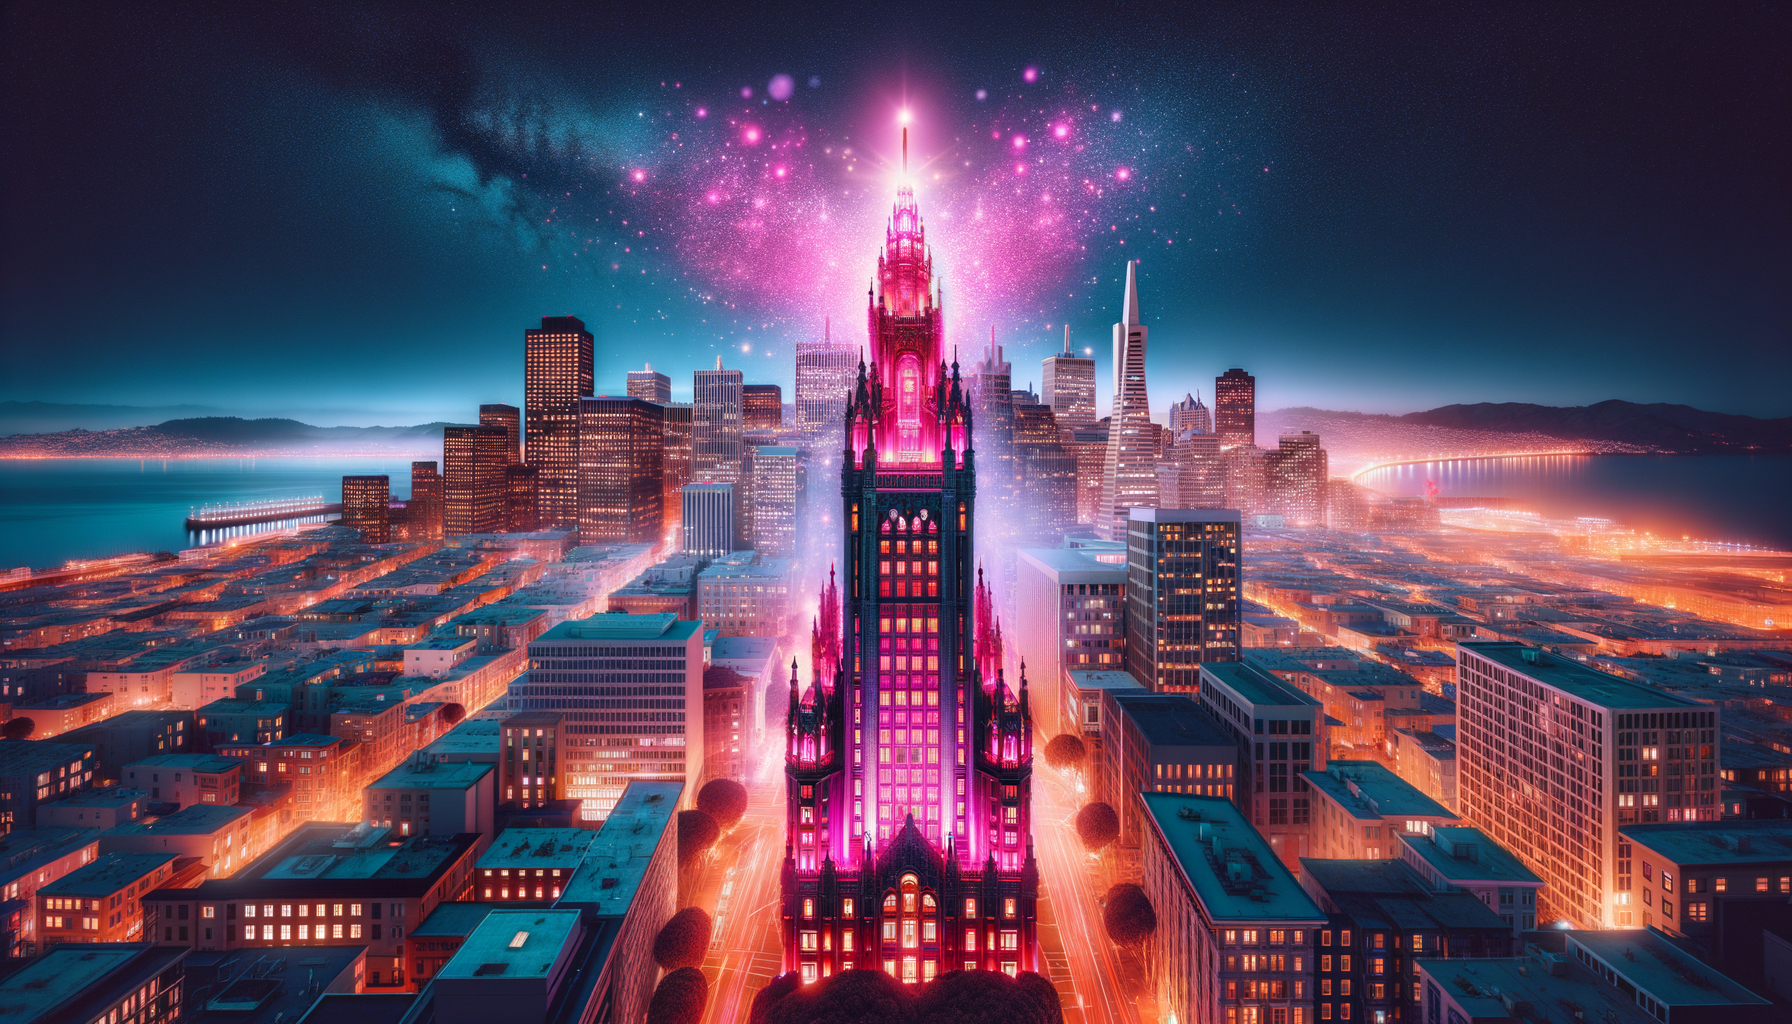 Illustration of the city of San Francisco with a single building radiating a fuschia aura glow.